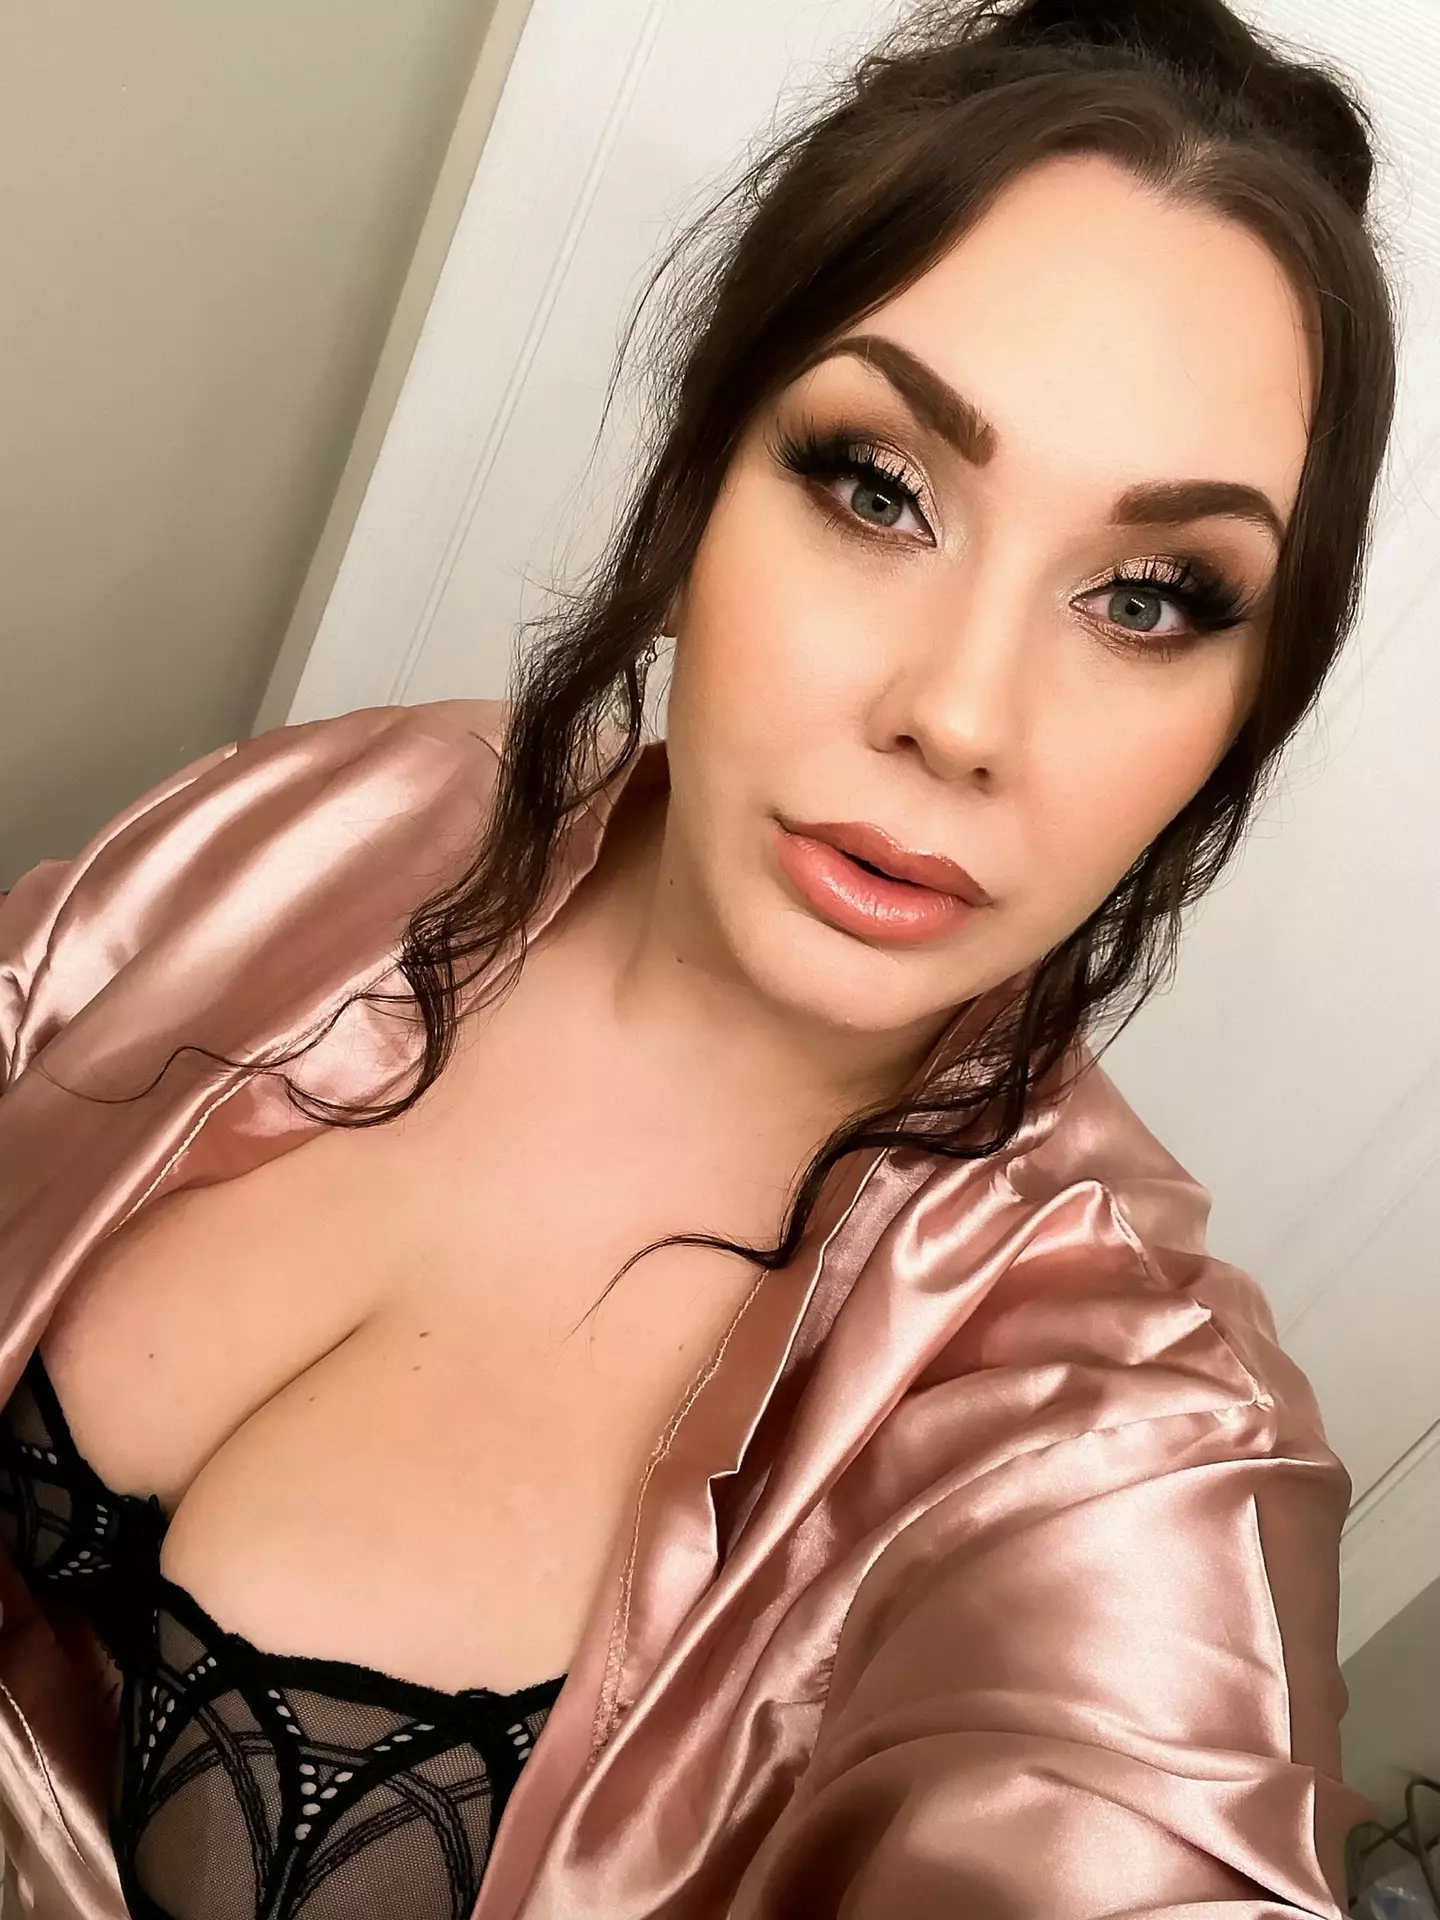 Romi says her landlord doubled her rent after finding out she was on OnlyFans.